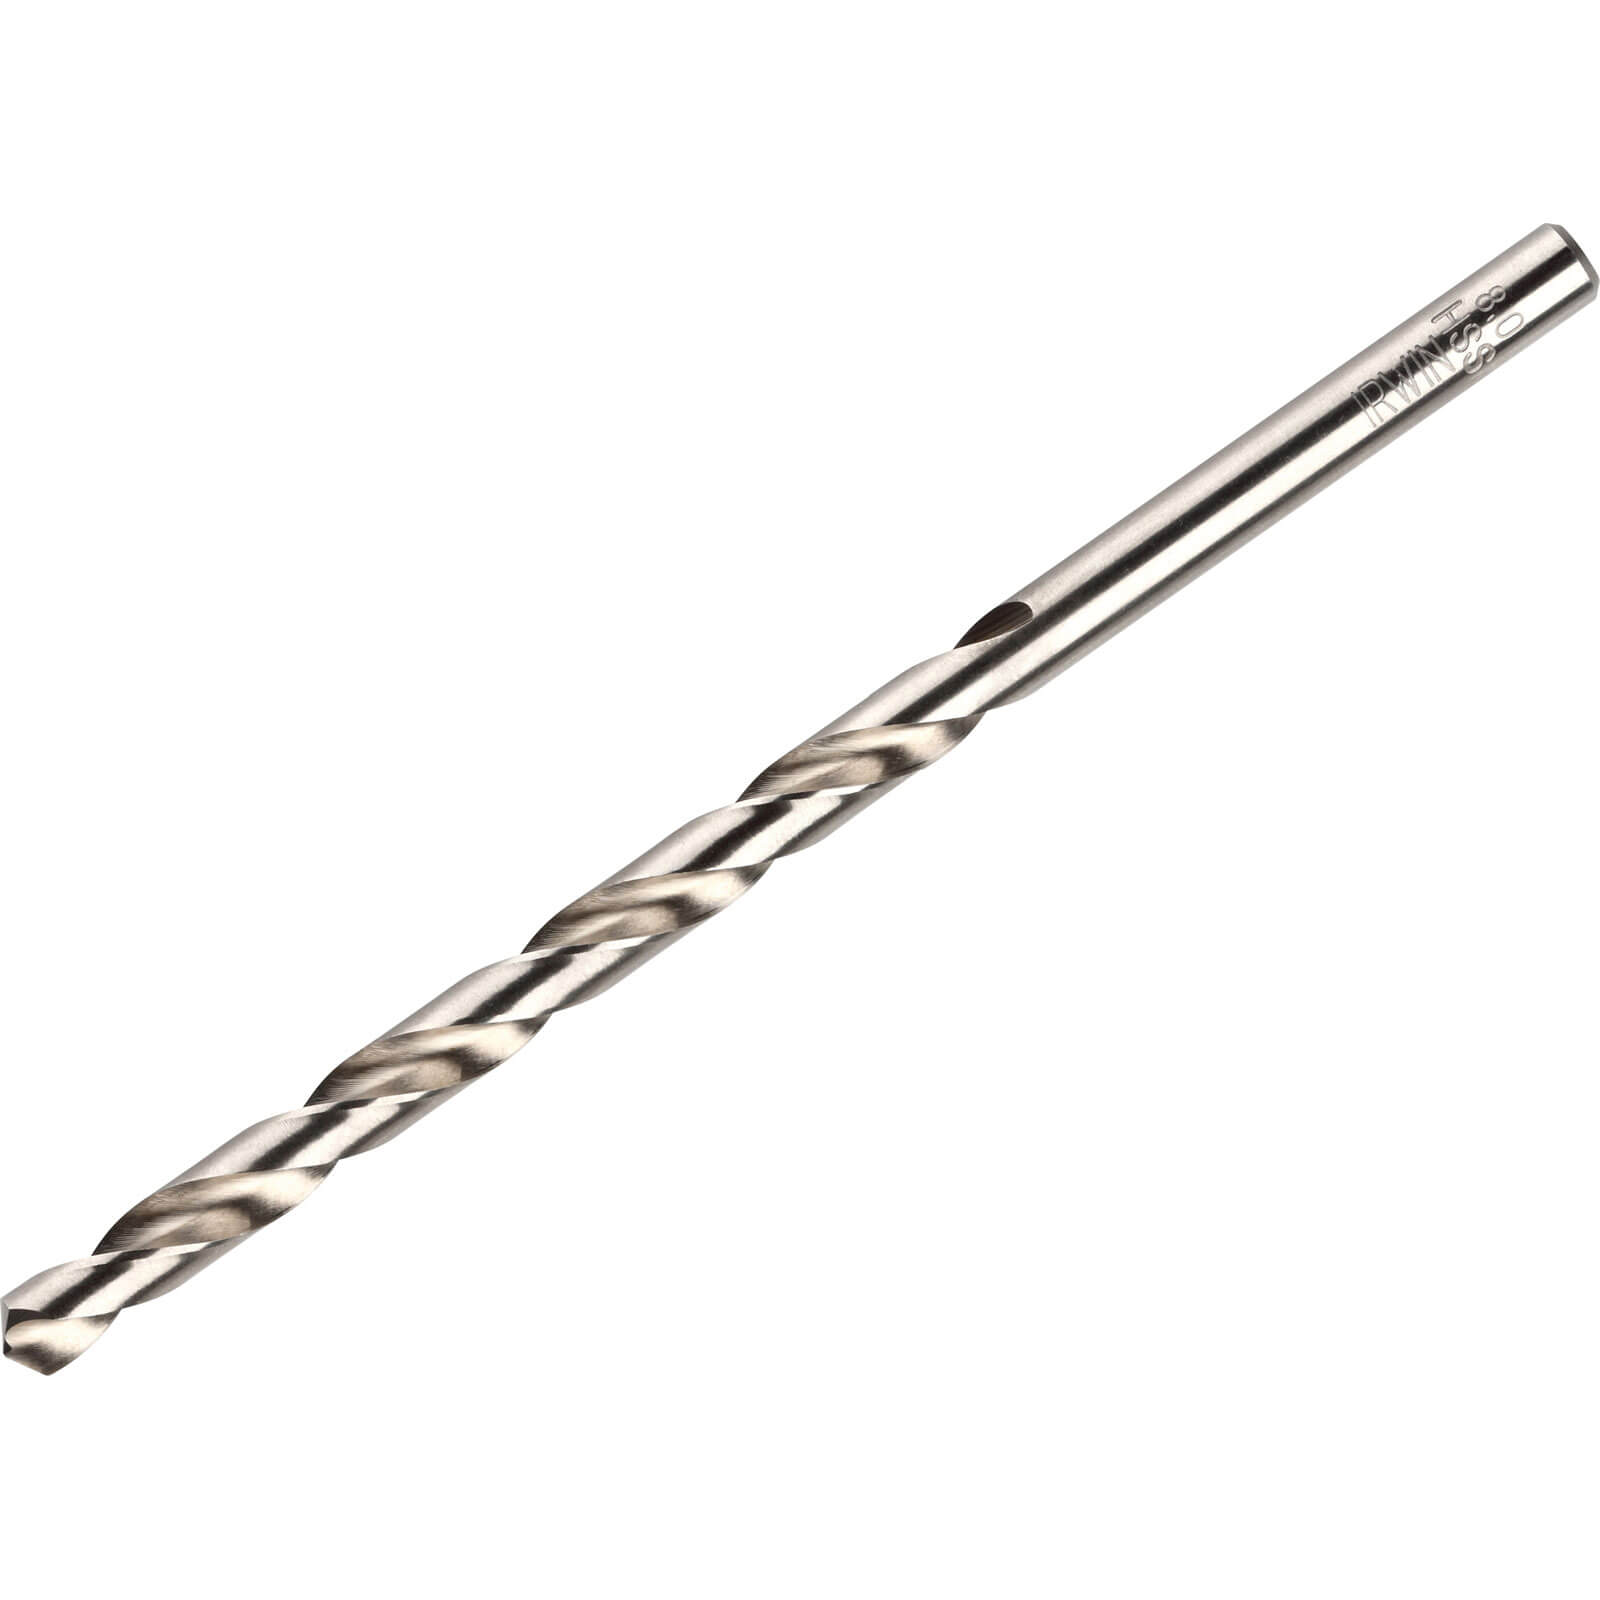 Photo of Irwin Hss Pro Drill Bits 1mm Pack Of 1